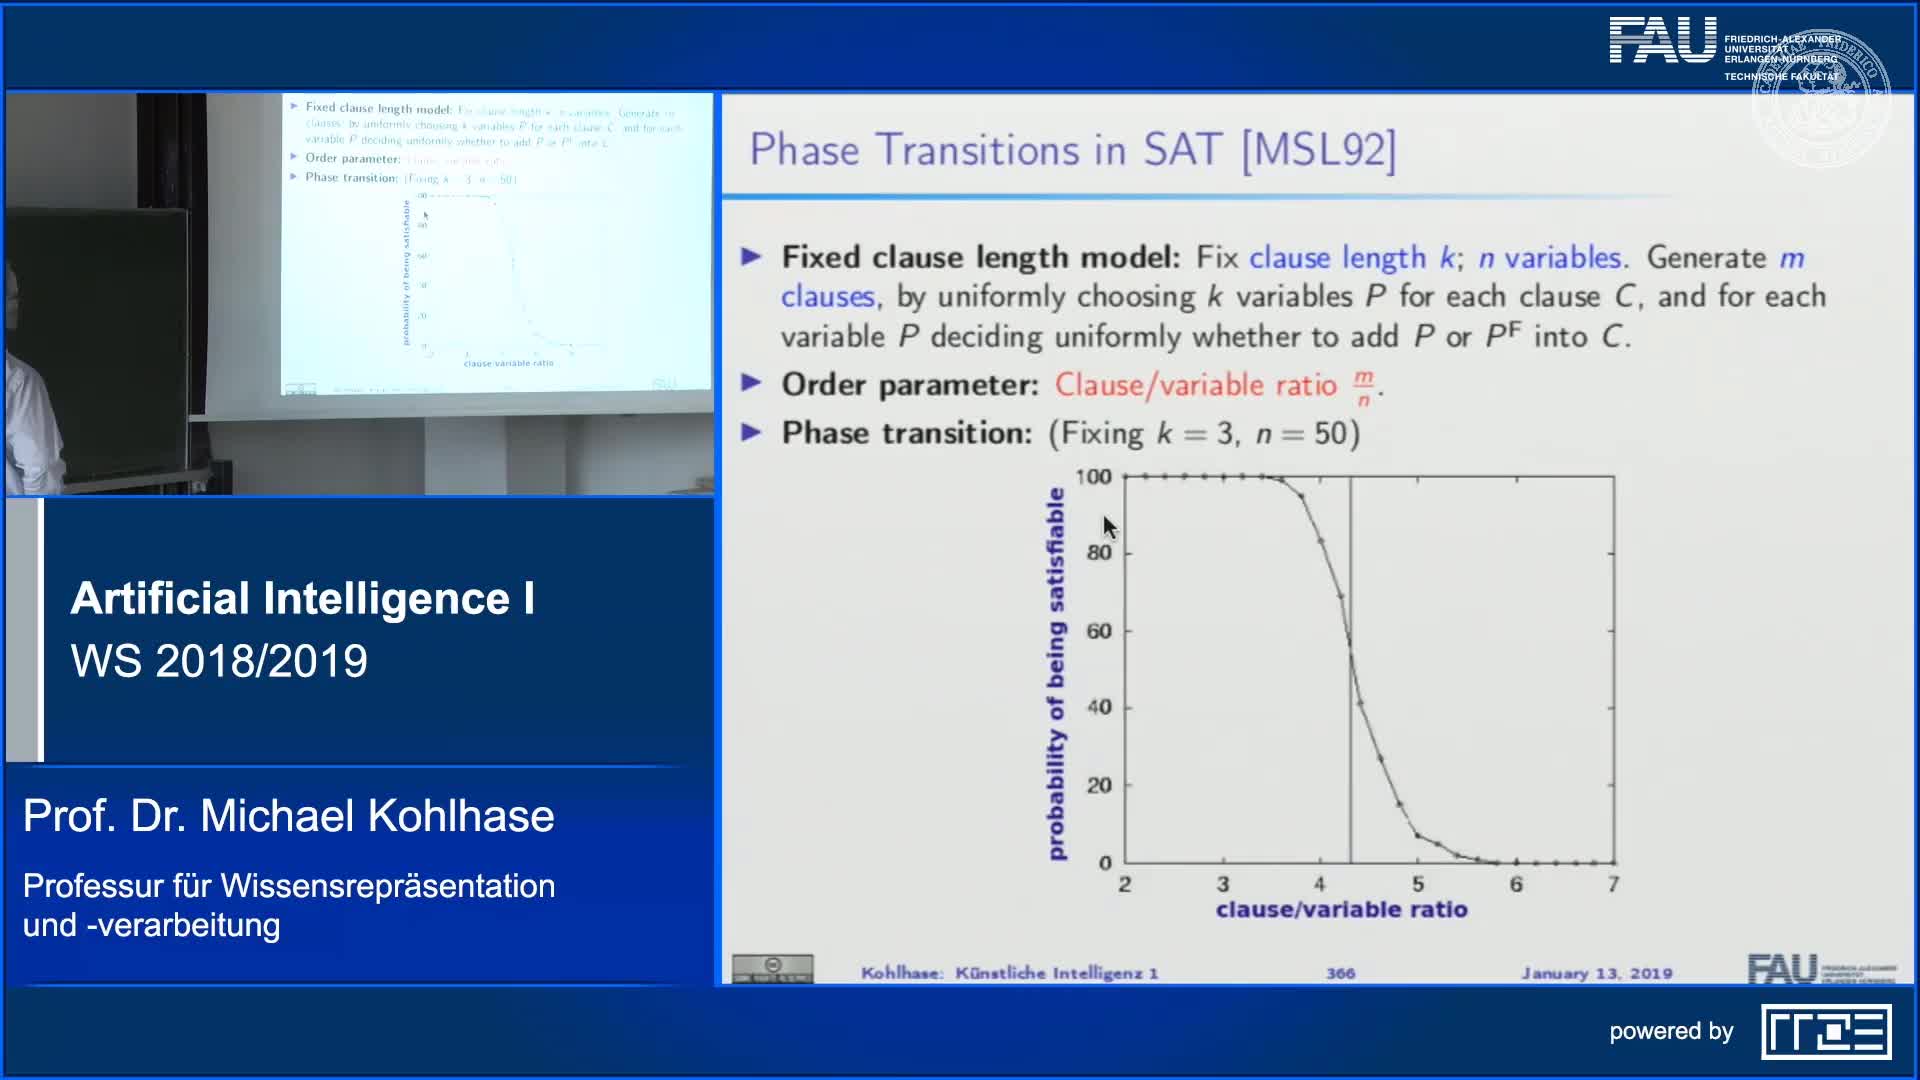 Recap Clip 12.5: Phase Transitions: Where the Really Hard Problems Are preview image